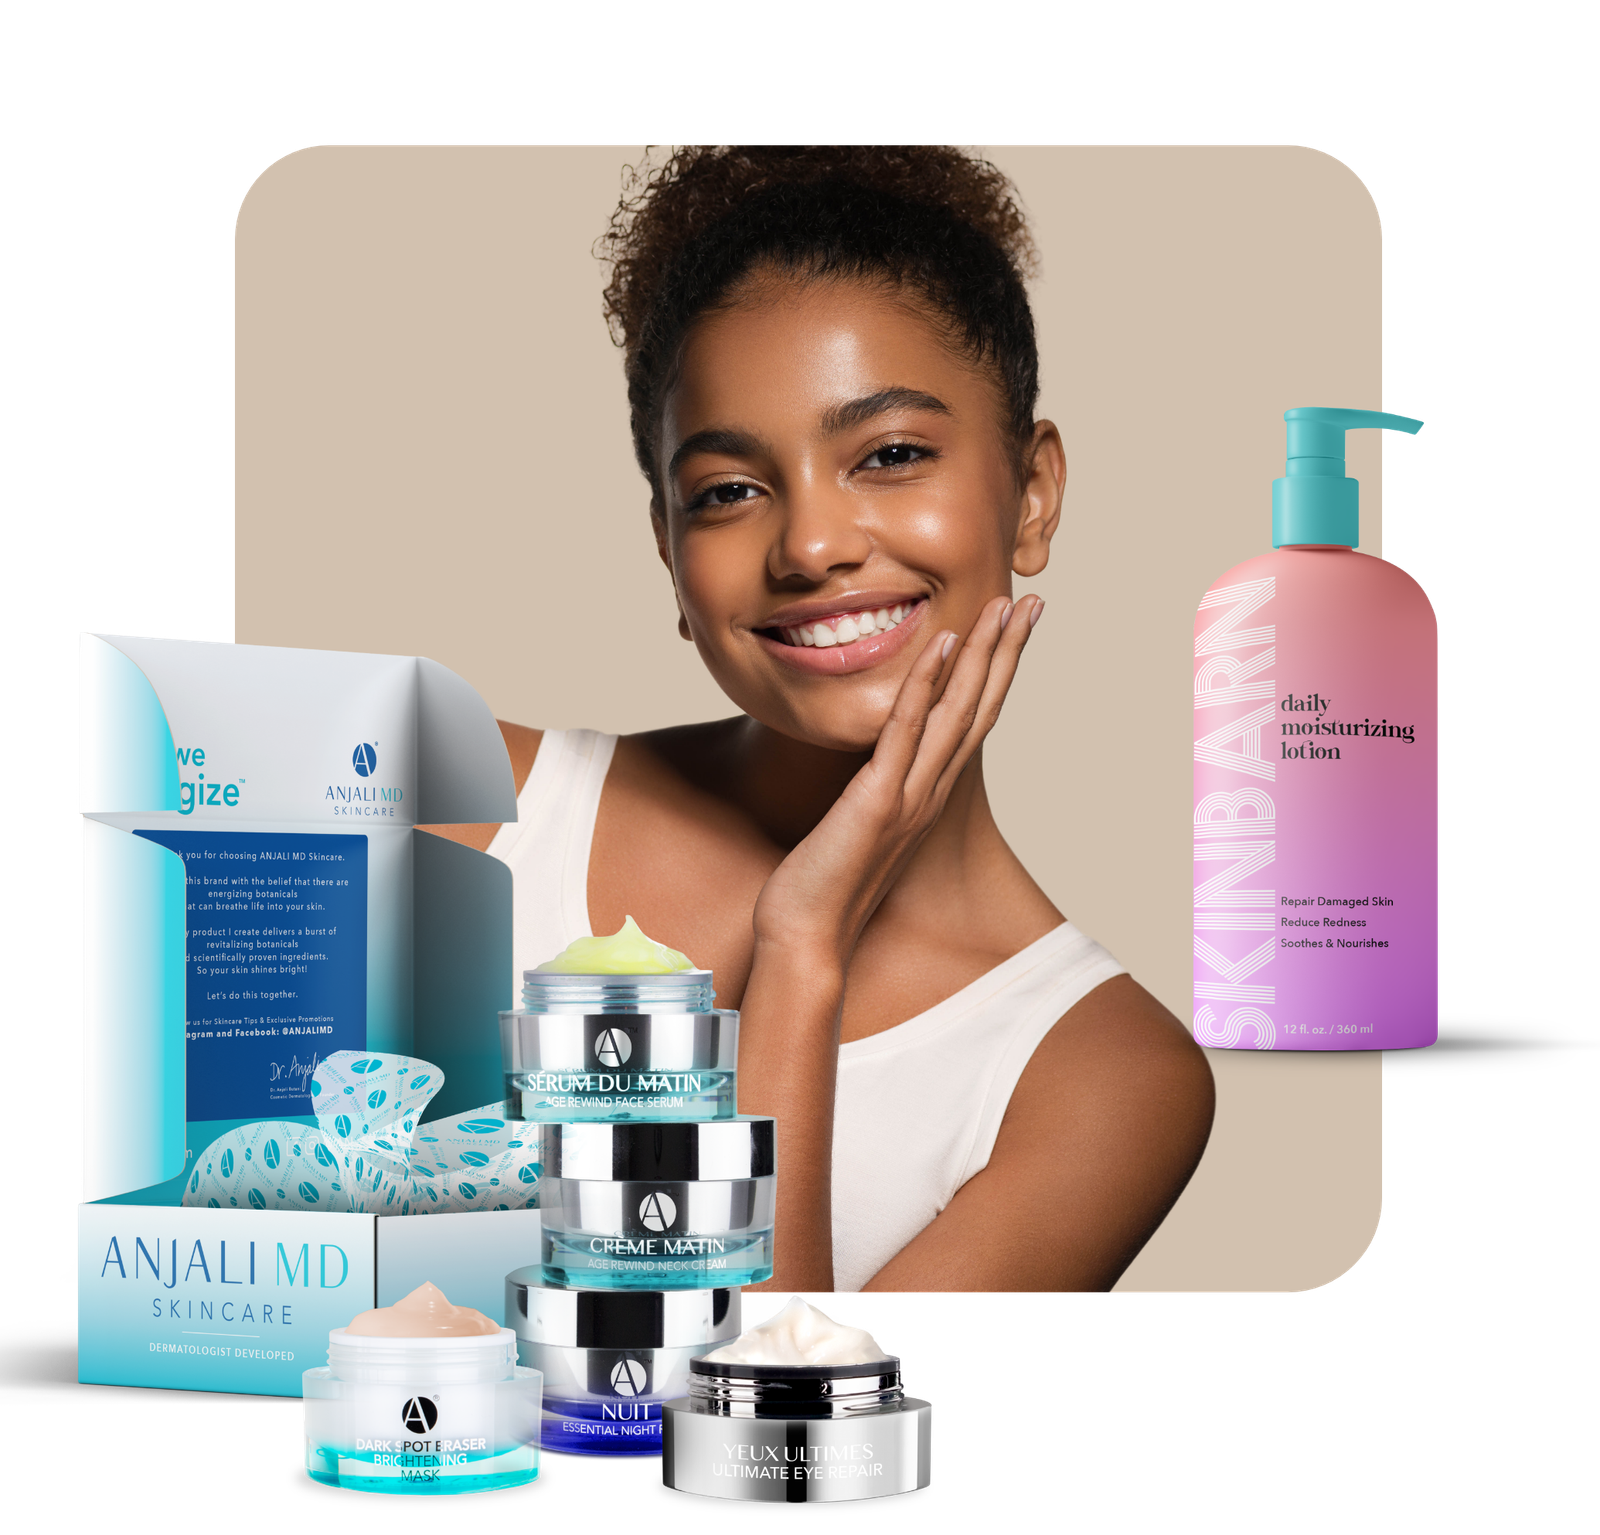 A skincare model next to various tailored skincare products